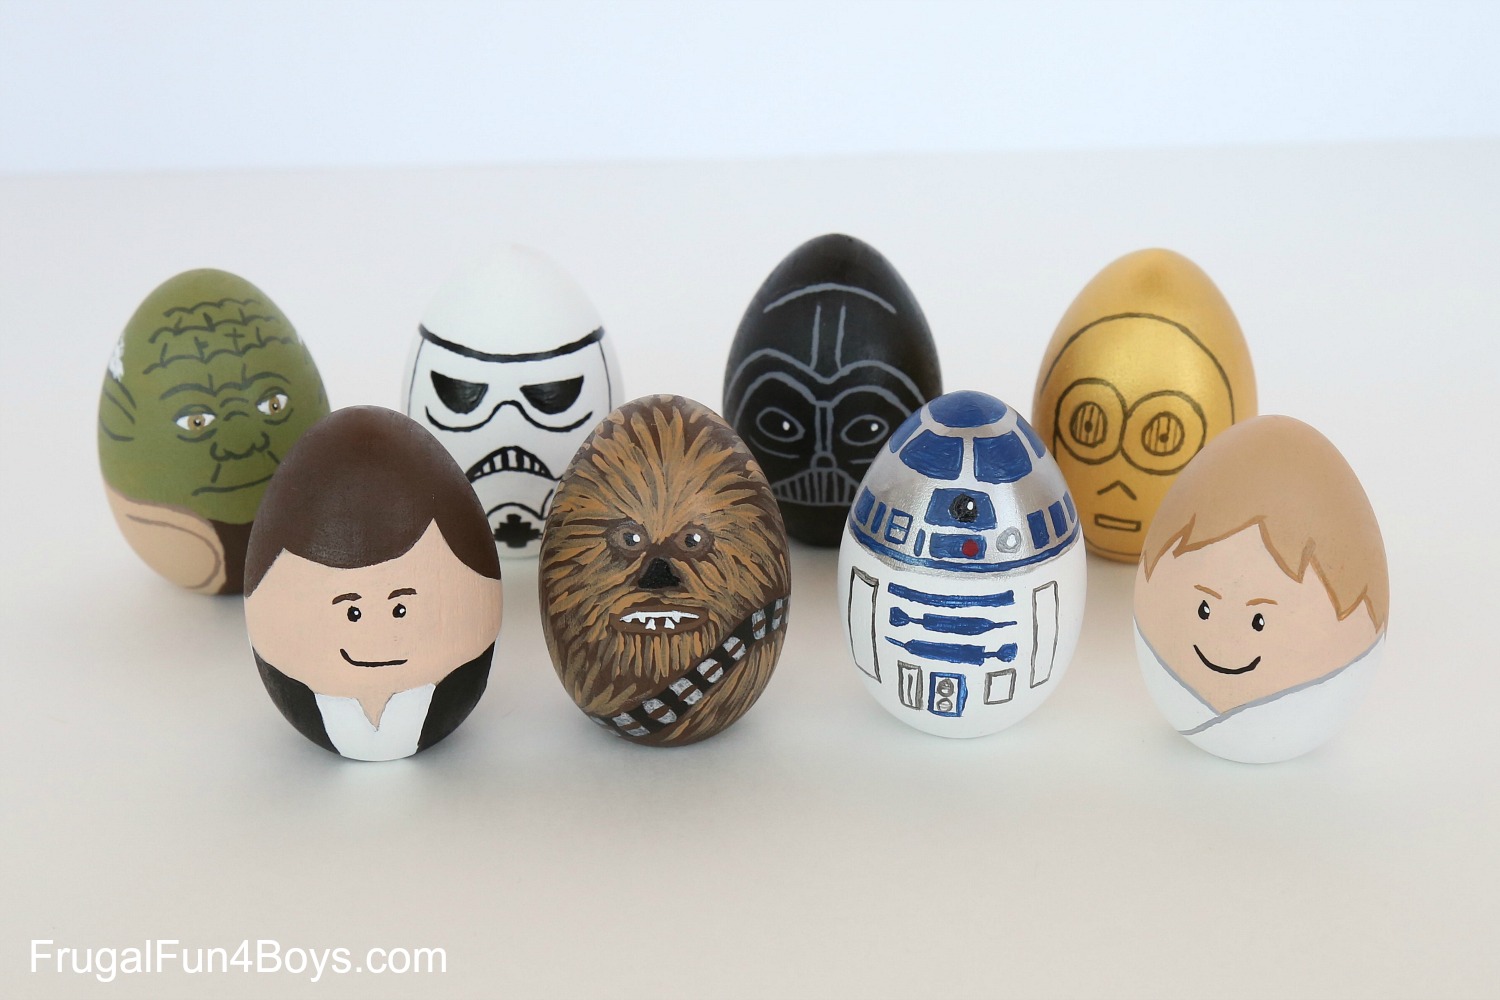 Painted Star Wars eggs from Frugal Fun 4 Boys